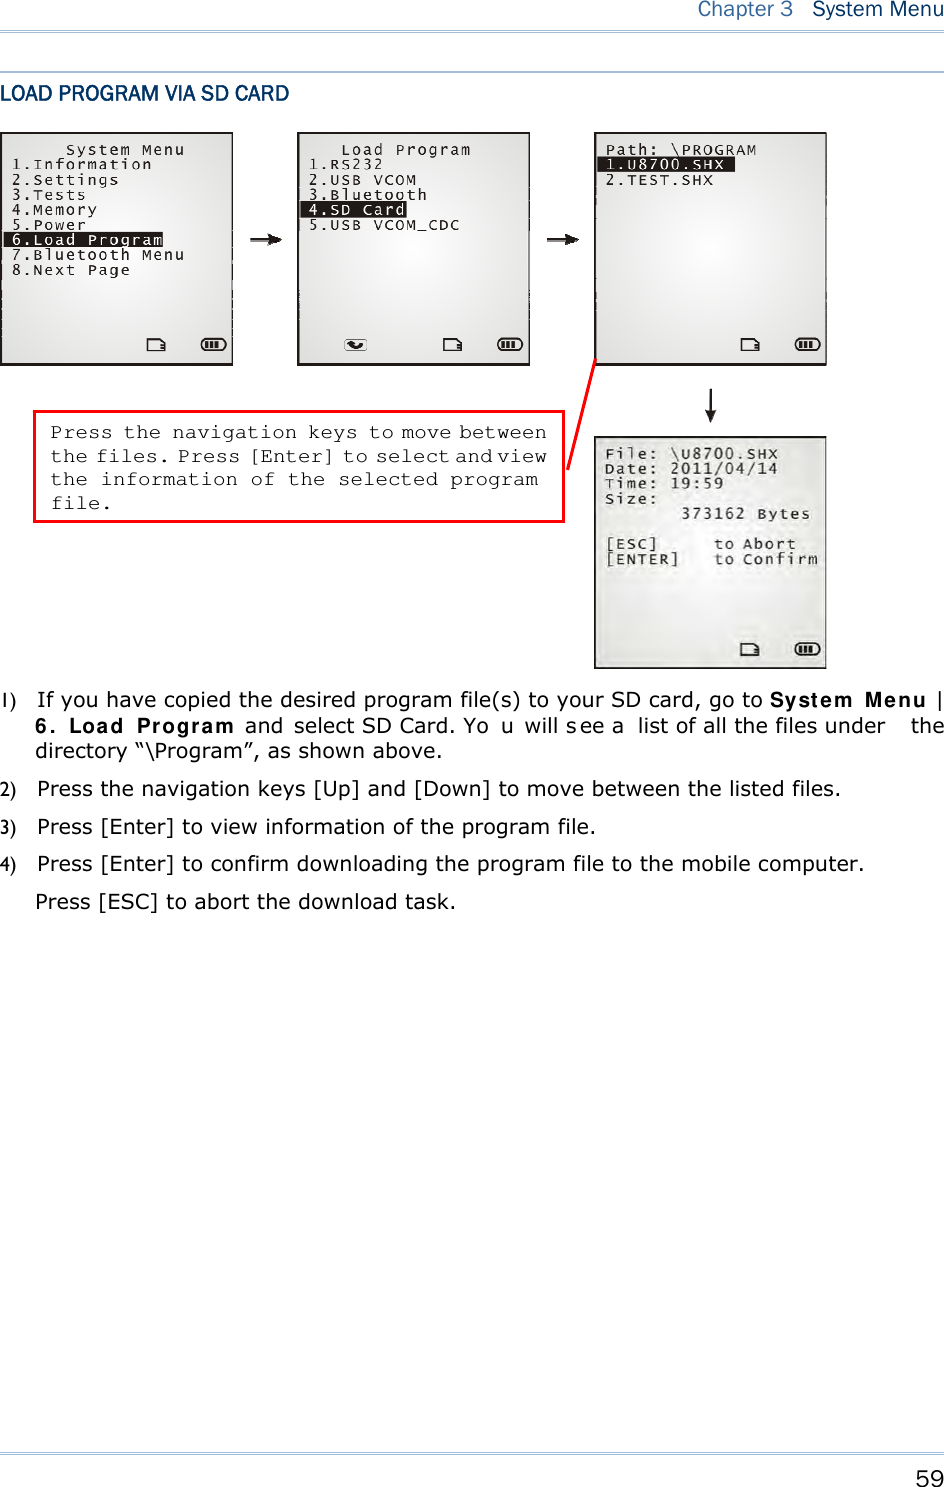     59   Chapter 3  System Menu  LOAD PROGRAM VIA SD CARD  1) If you have copied the desired program file(s) to your SD card, go to System Menu | 6. Load Program and  select SD Card. Yo u will s ee a  list of all the files under  the directory “\Program”, as shown above. 2) Press the navigation keys [Up] and [Down] to move between the listed files. 3) Press [Enter] to view information of the program file. 4) Press [Enter] to confirm downloading the program file to the mobile computer. Press [ESC] to abort the download task.  Press the navigation keys to move between the files. Press [Enter] to select and view the information of the selected program file. 